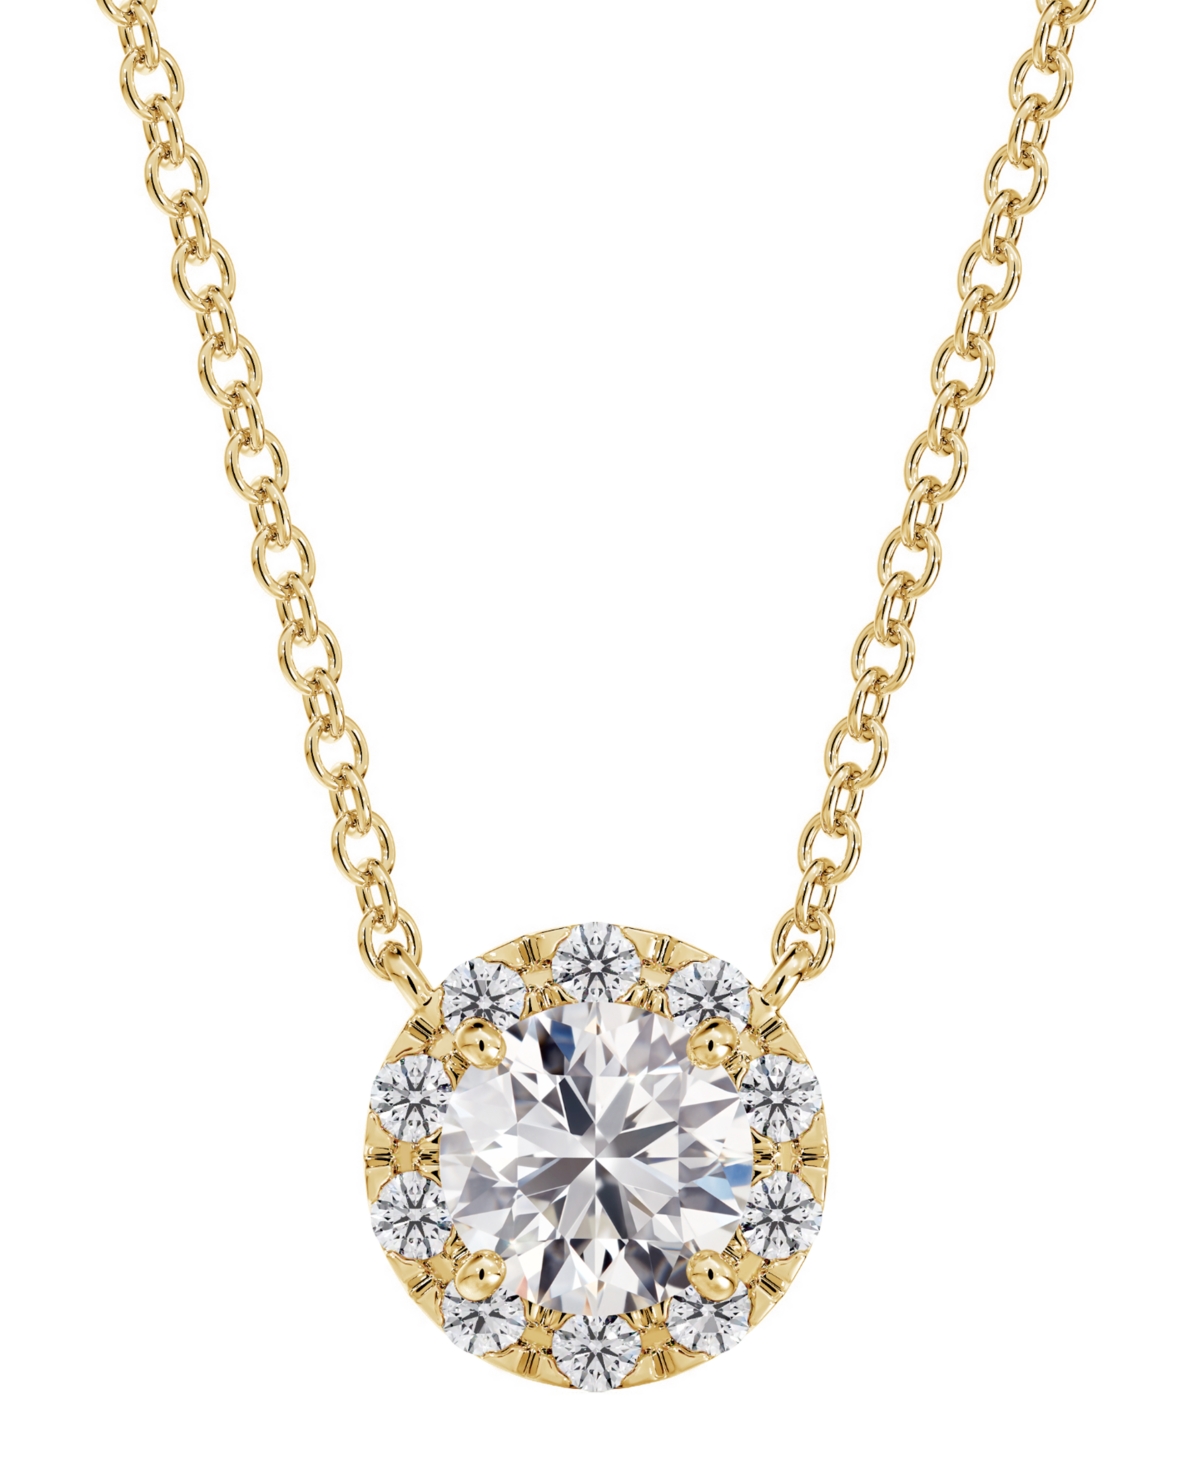 De Beers Forevermark Portfolio by De Beers Forevermark Diamond Halo Pendant Necklace (1/2 ct. t.w.) in 14k White or Yellow Gold, 16" + 2" extender